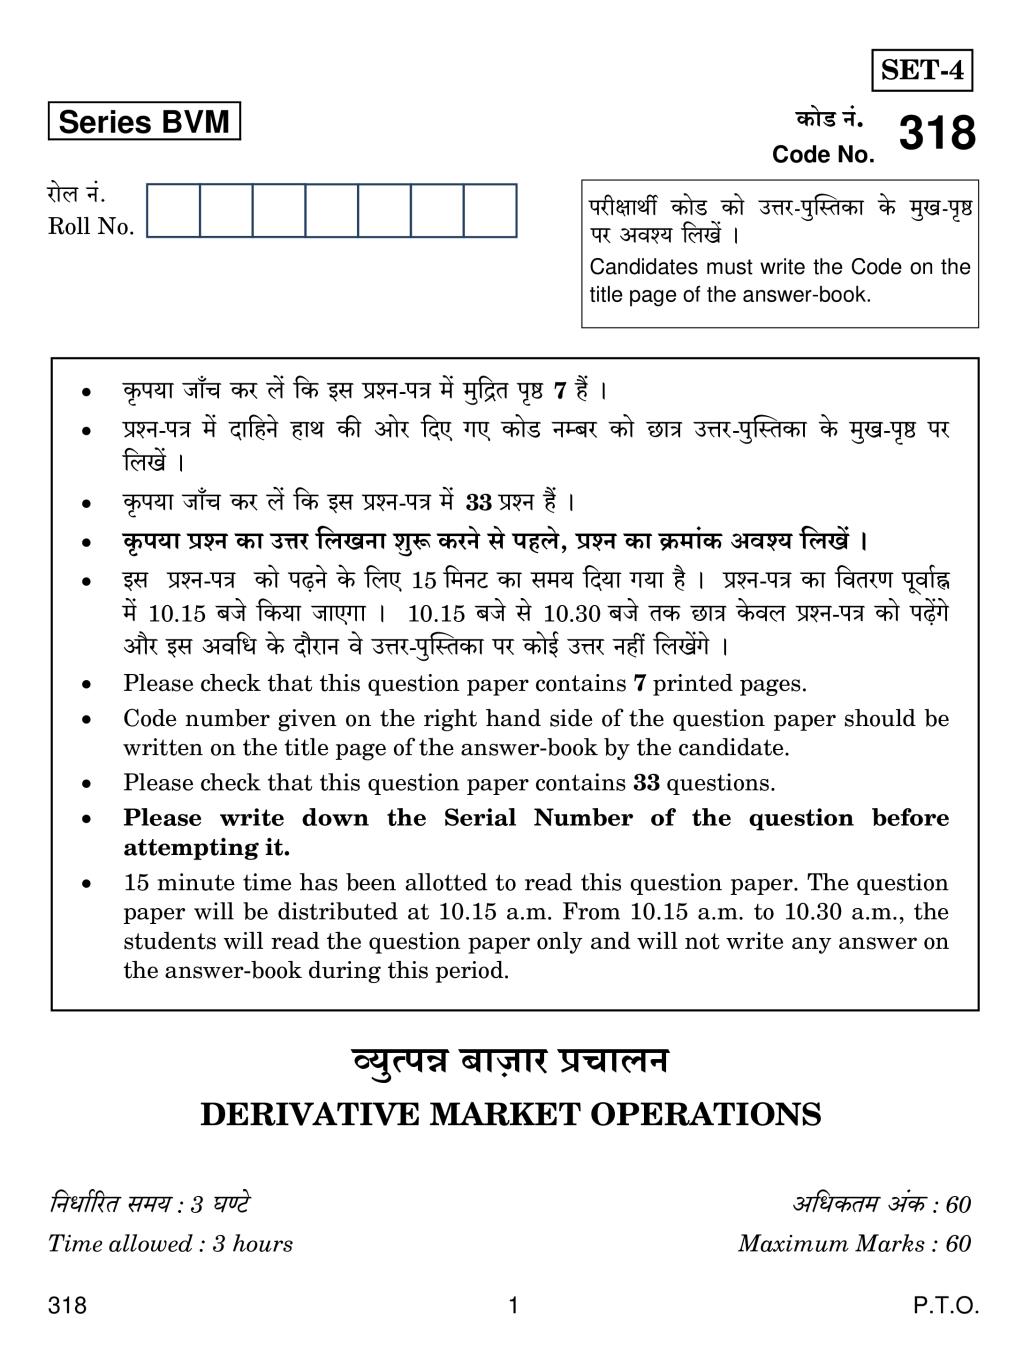 CBSE Class 12 Derivative Market Operations Question Paper 2019 - Page 1